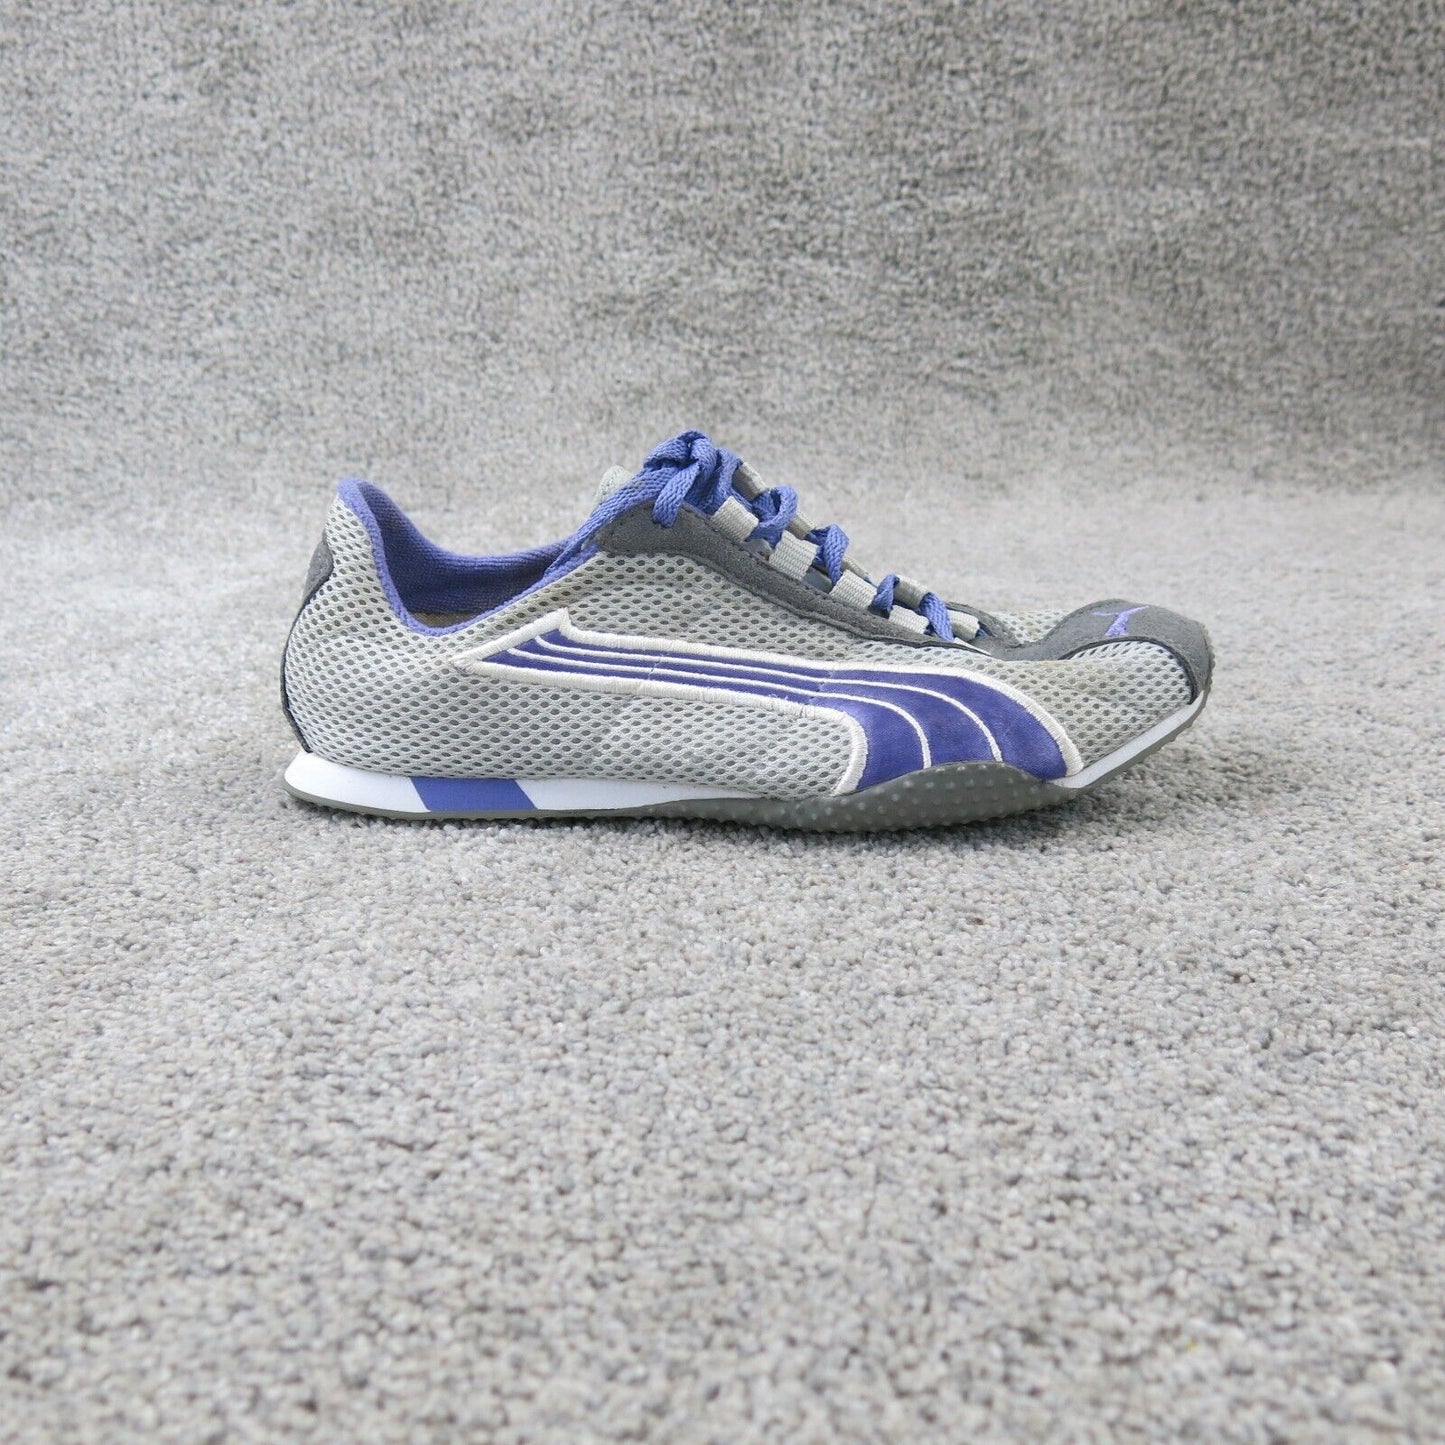 PUMA Women Athletic Shoes Gray Purple Low Top Running Sneaker Size US 37.5